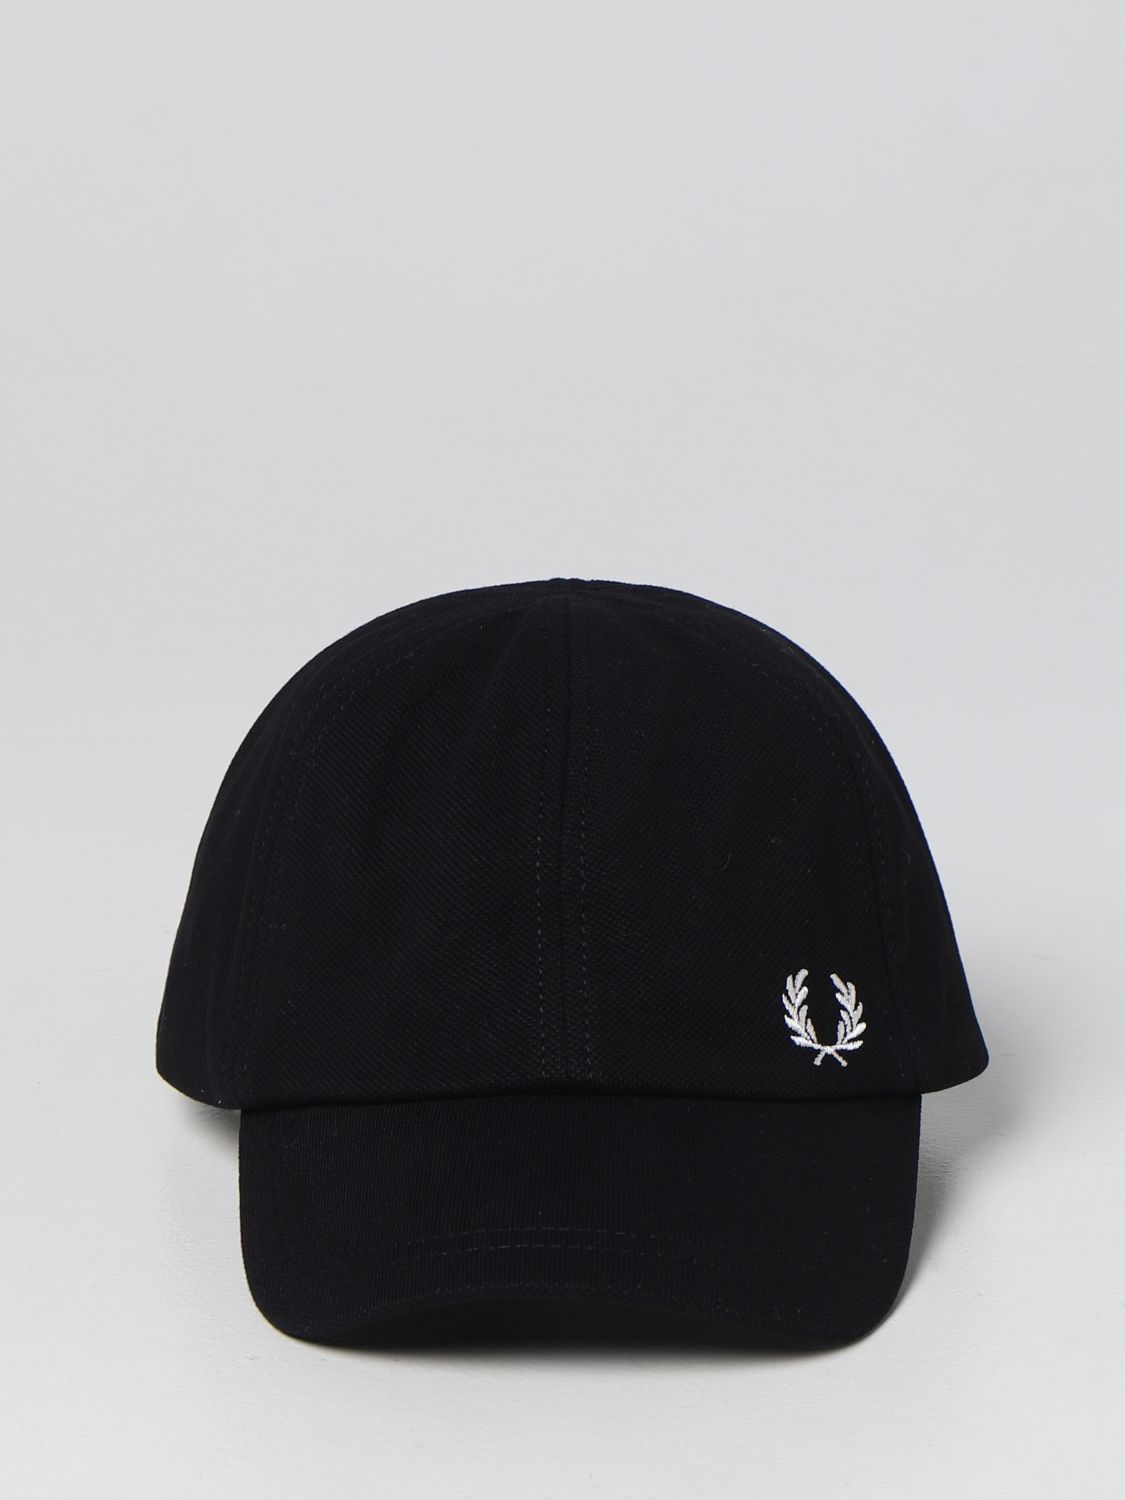 Chapeau Fred Perry: Chapeau Fred Perry homme noir 2